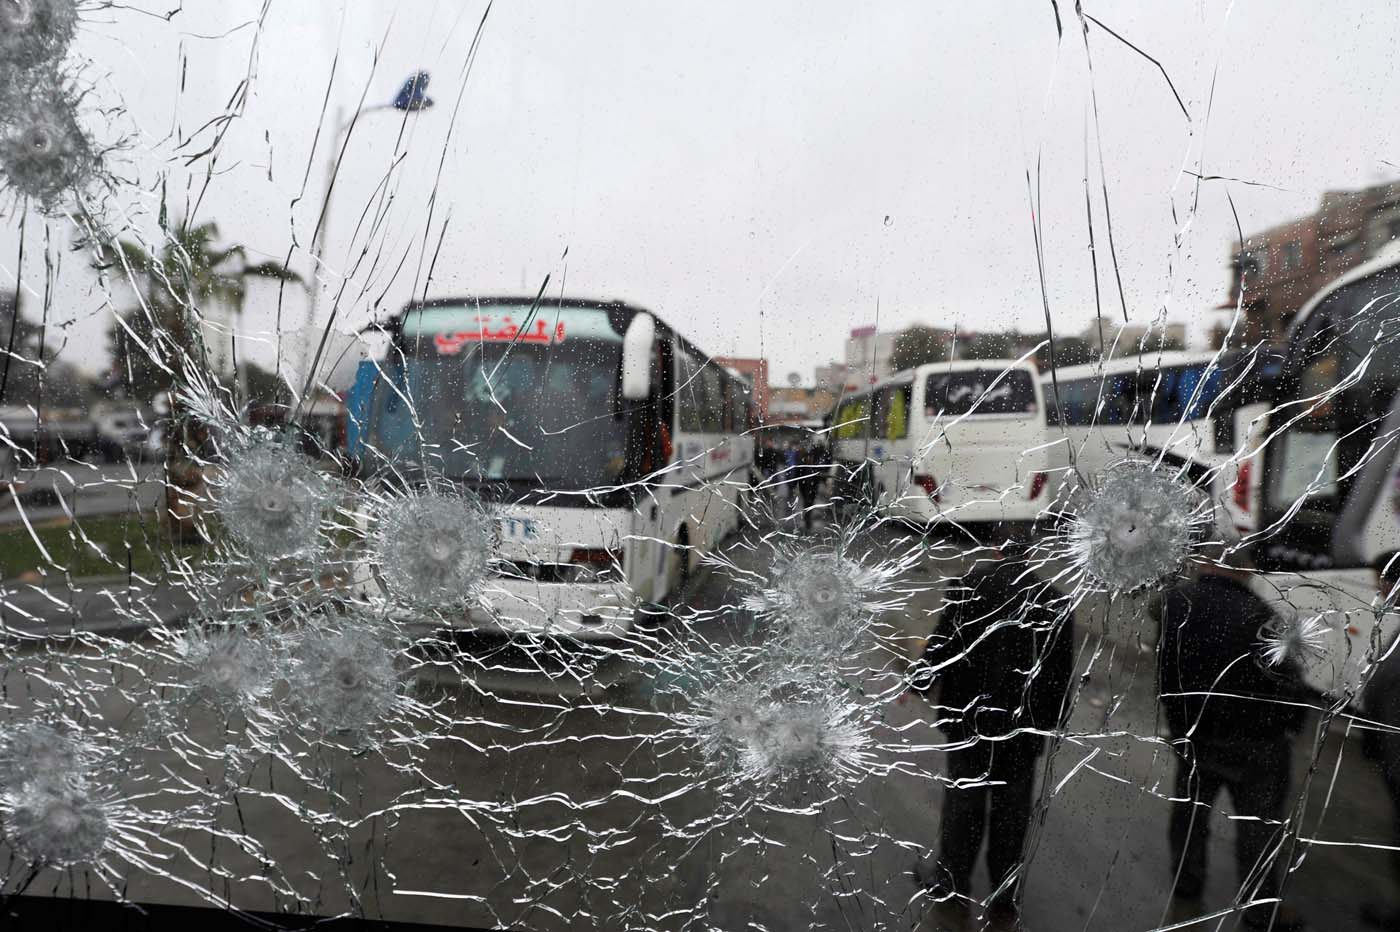 People are seen though a shattered glass window of a bus at the site of an attack by two suicide bombers in Damascus, Syria March 11, 2017. REUTERS/Omar Sanadiki TPX IMAGES OF THE DAY